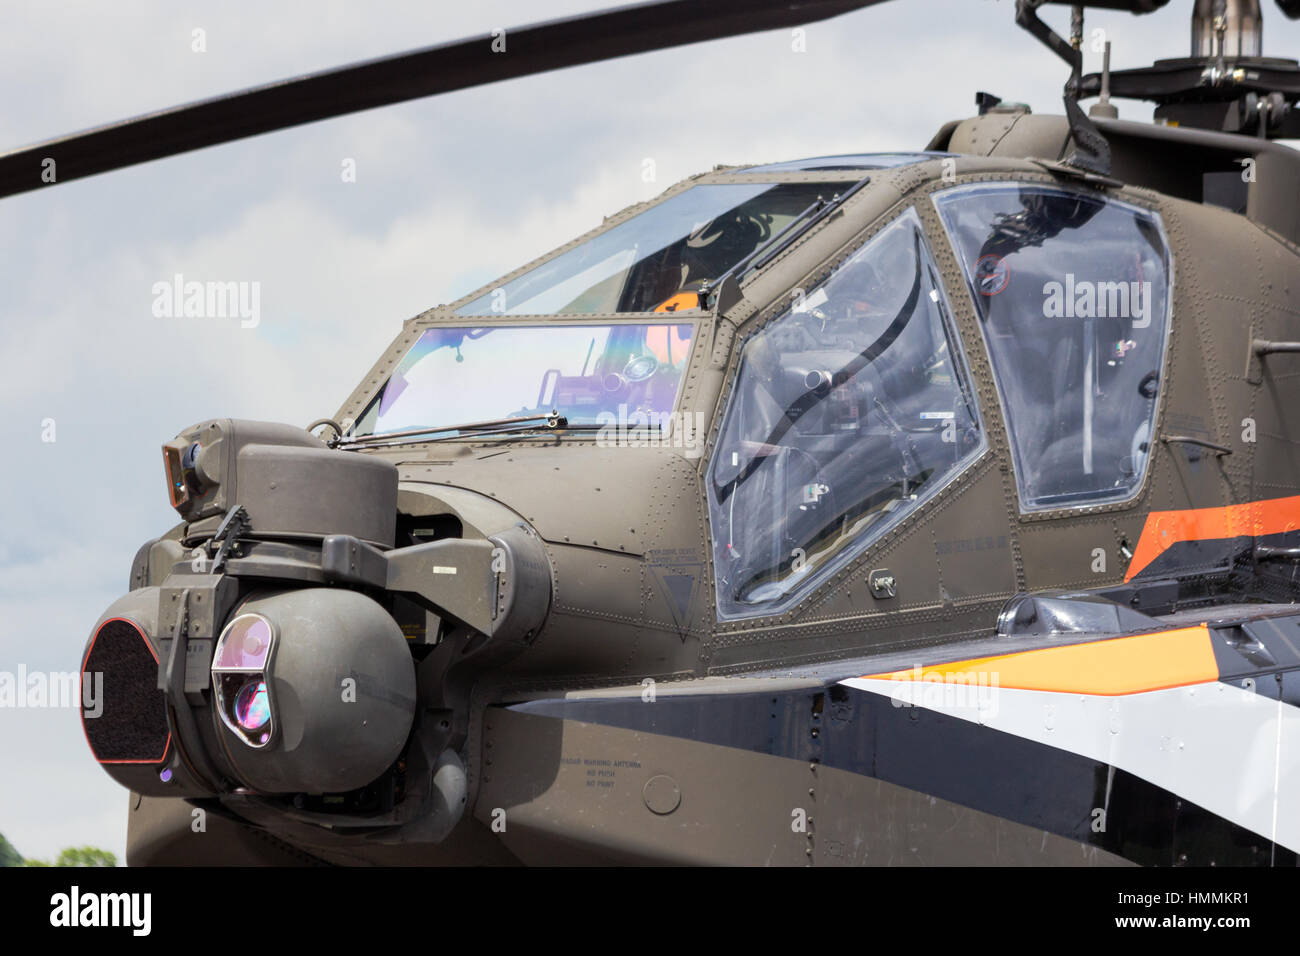 GILZE-RIJEN, NETHERLANDS - JUNE 20: Dutch Air Force AH-64 Apache about to land at the Royal Netherlands Air Force Days June 20, 2014 in Gilze-Rijen, N Stock Photo